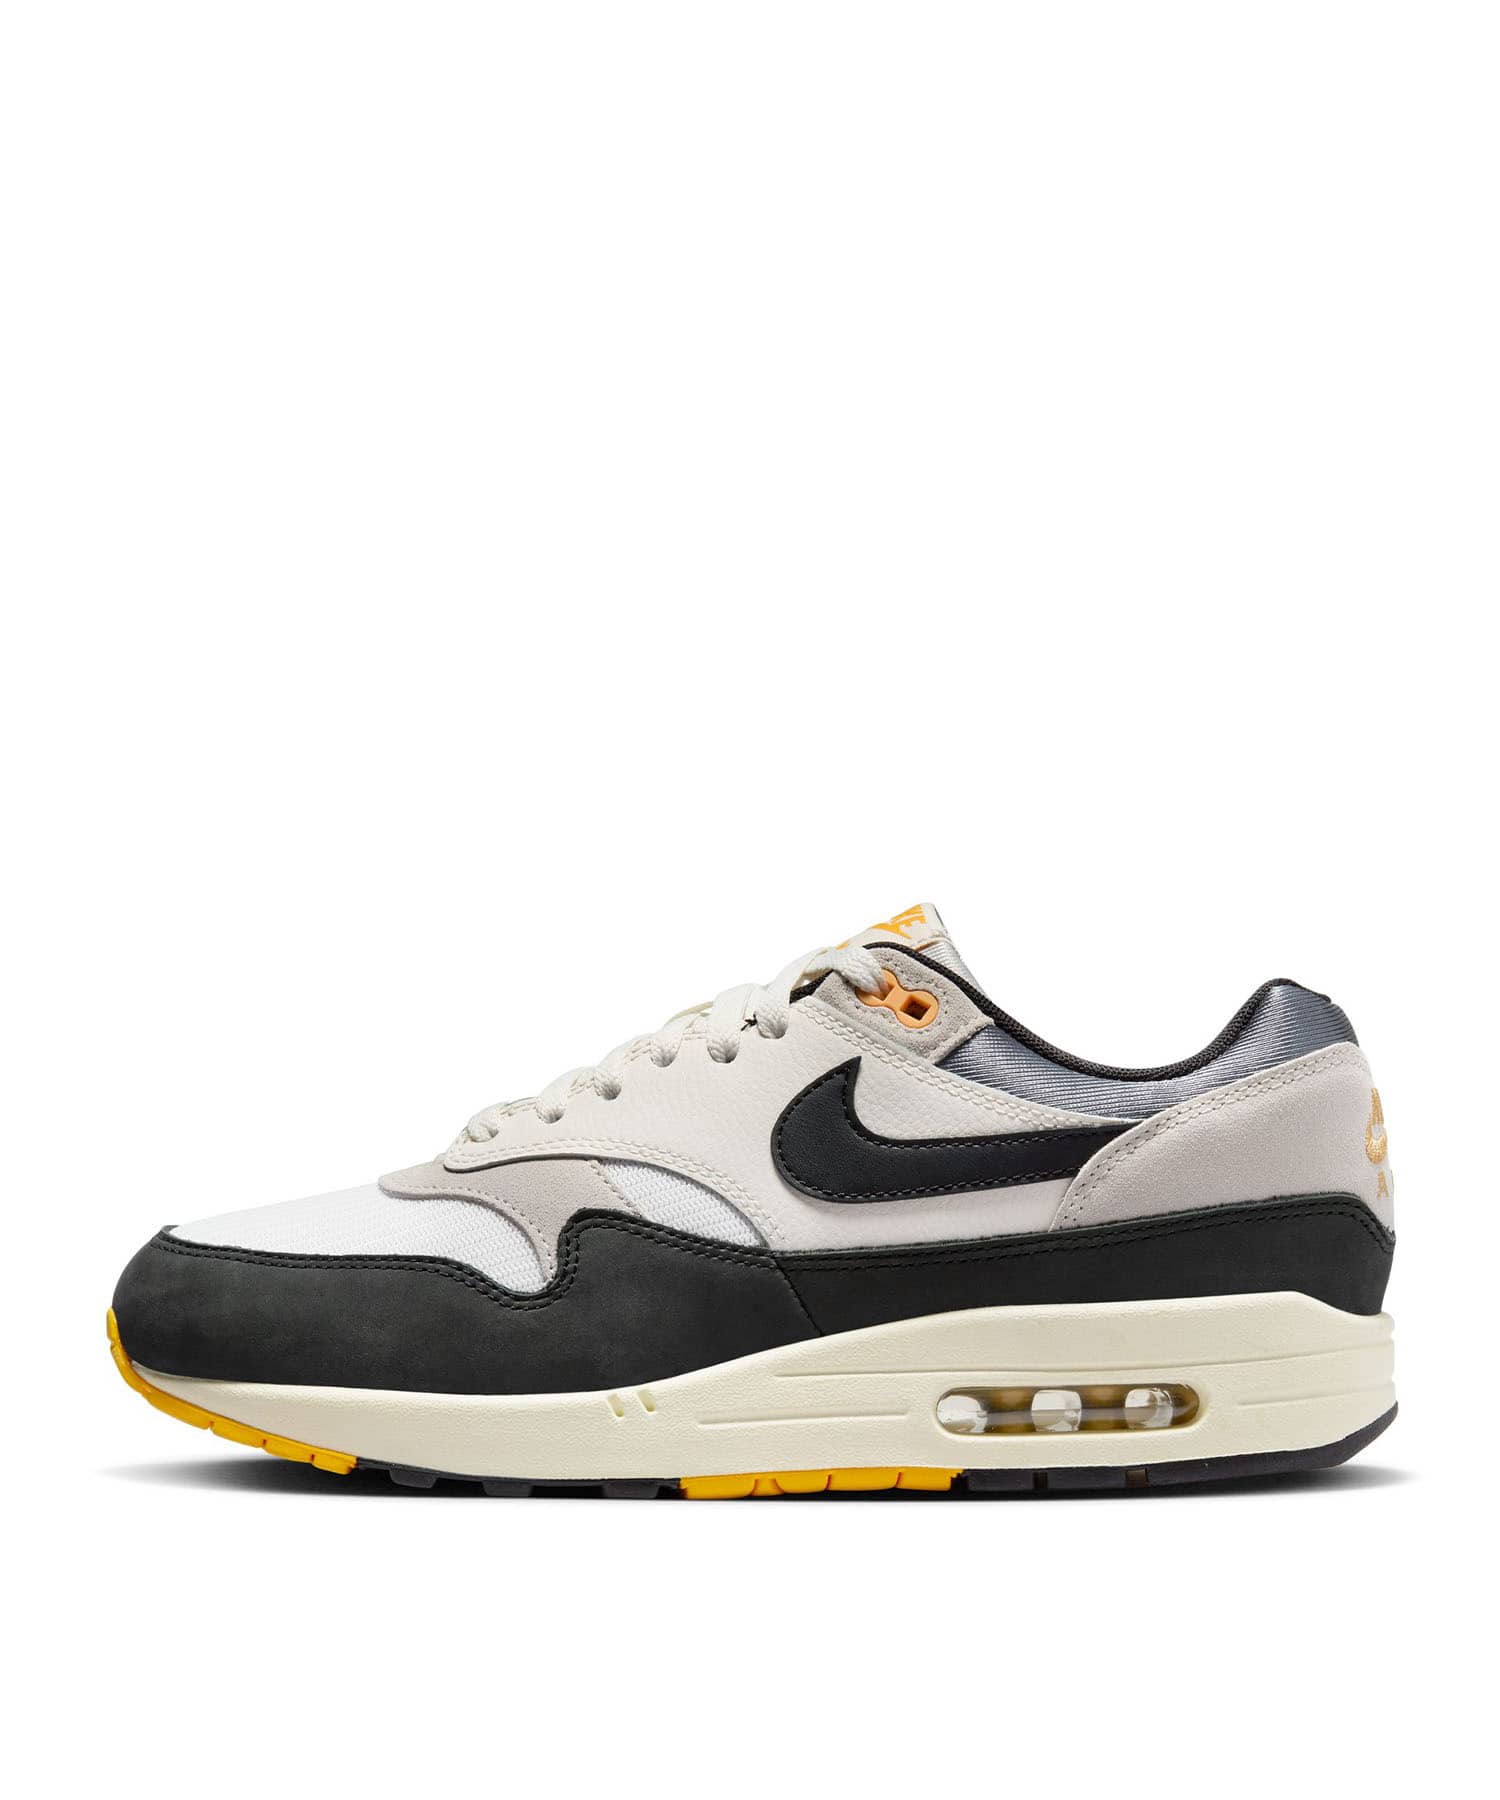 NIKE / AIR MAX 1｜ESTNATION ONLINE STORE｜エストネーション 公式通販